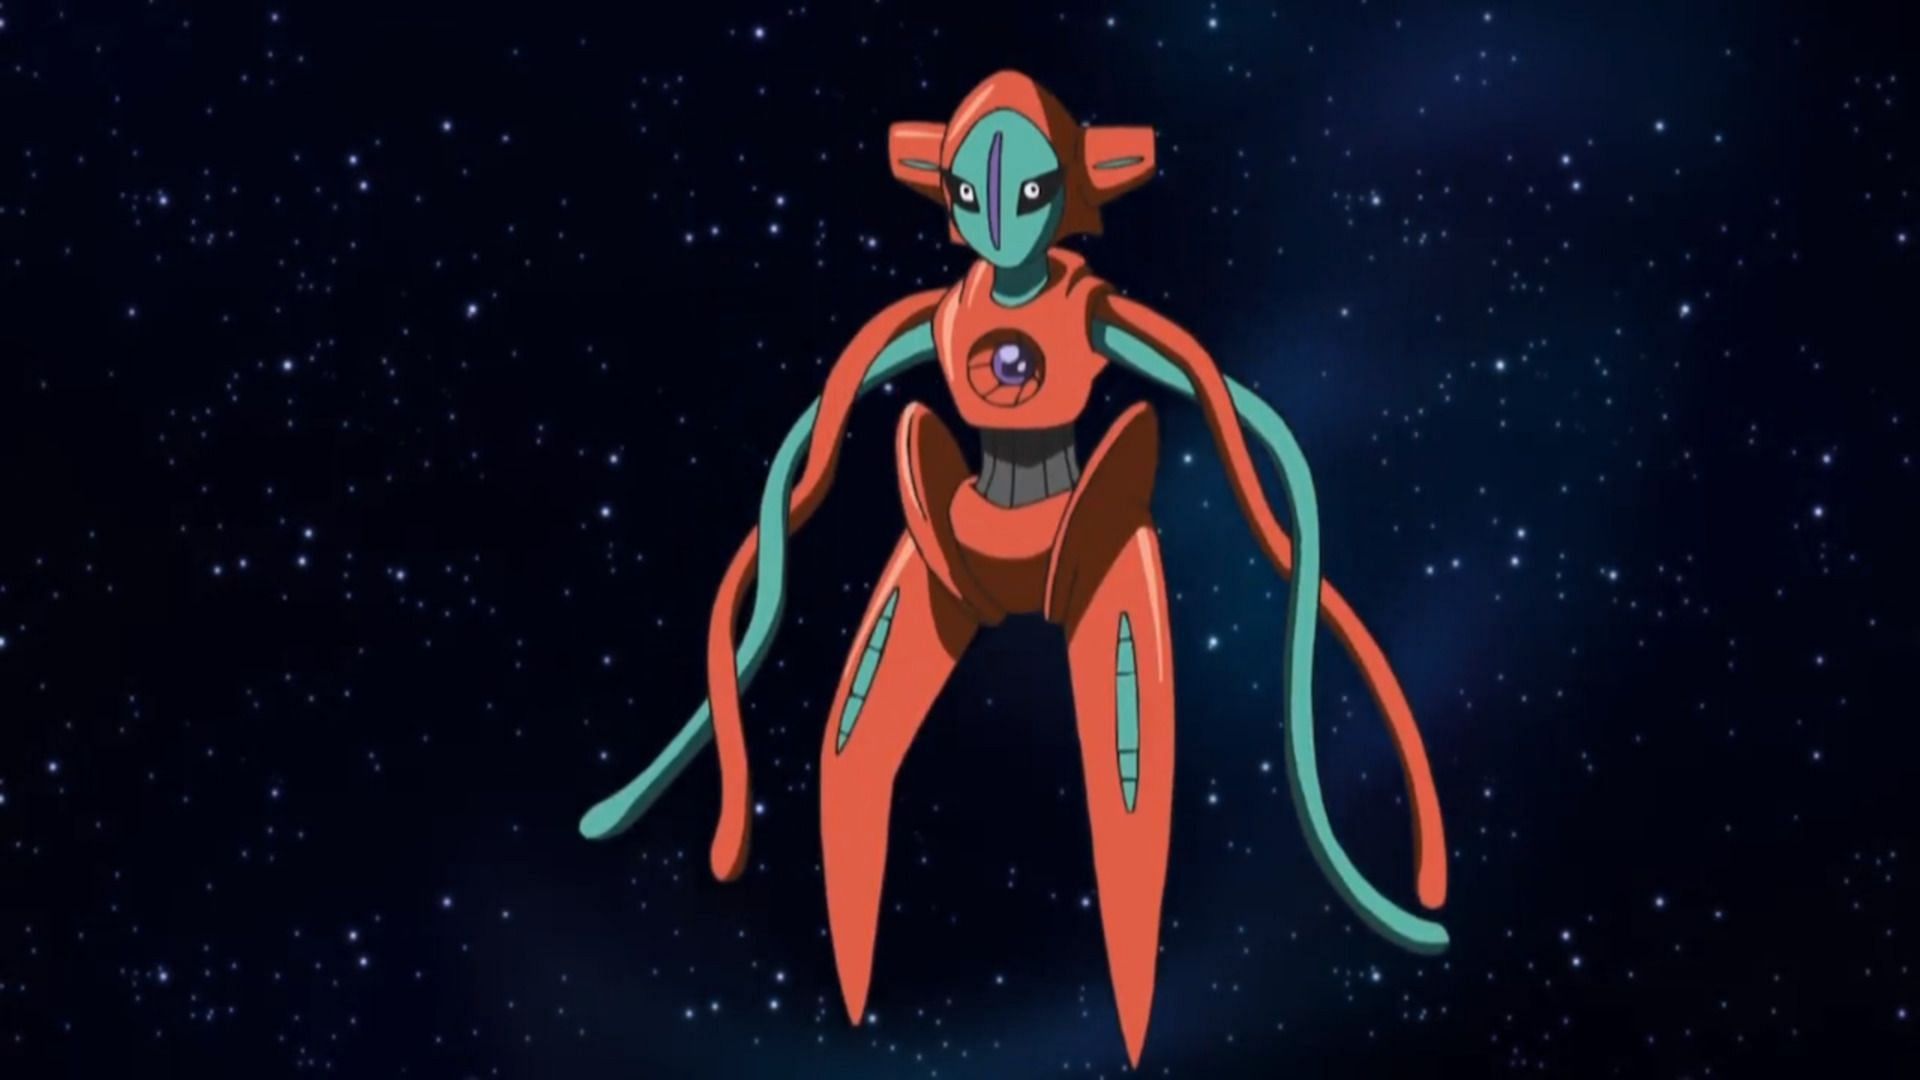 Deoxys screenshots, images and pictures - Comic Vine